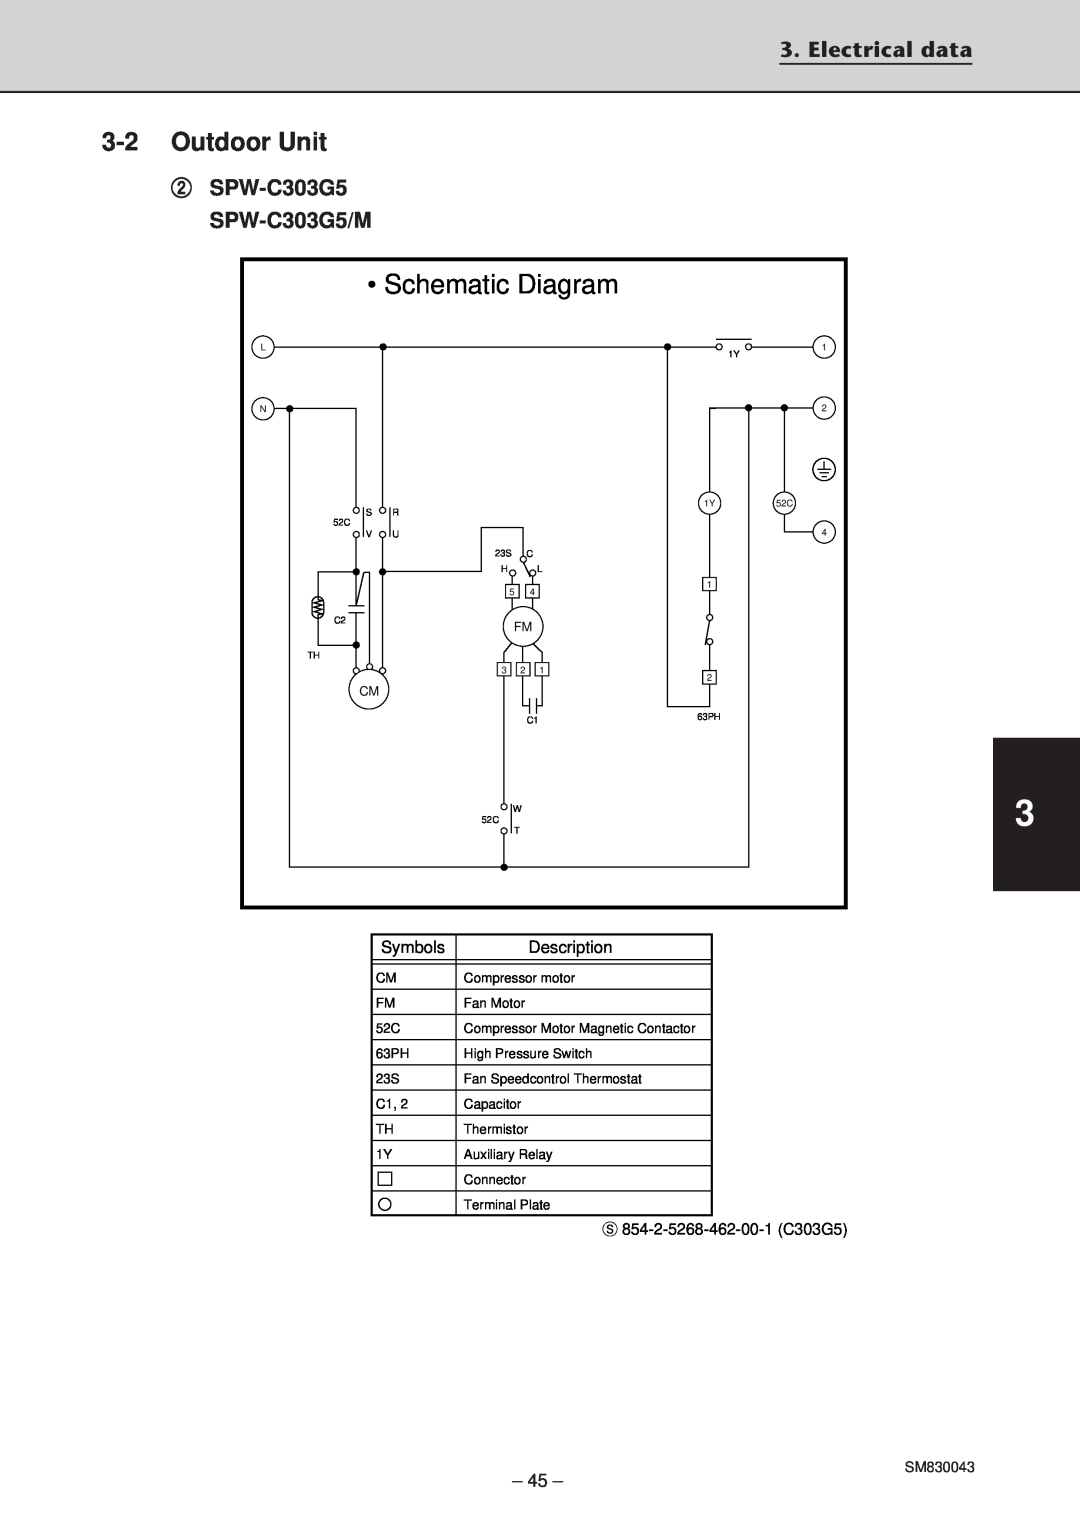 Sanyo SPW-T303GS56, SPW-T363GS56, SPW-T483G56 Schematic Diagram, 3-2Outdoor Unit, Electrical data, SPW-C303G5/M 